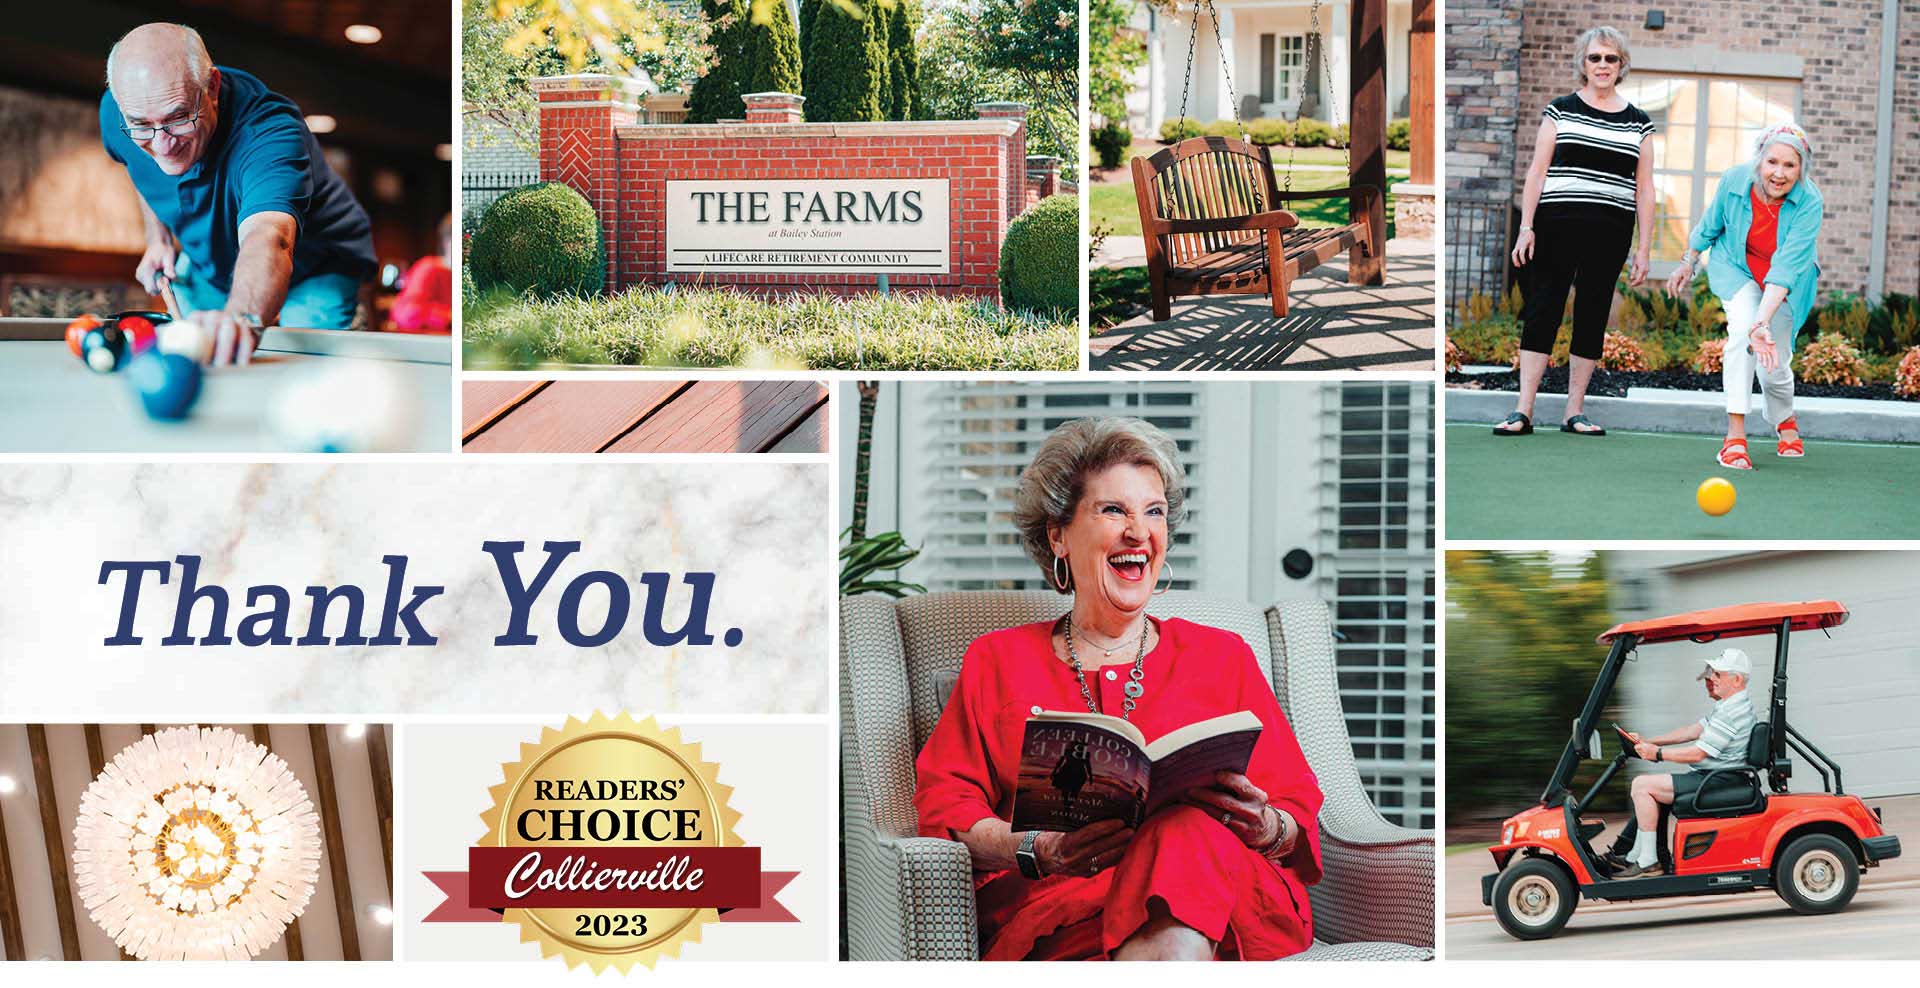 Thank you for voting us Best Senior Living for the third year in a row!